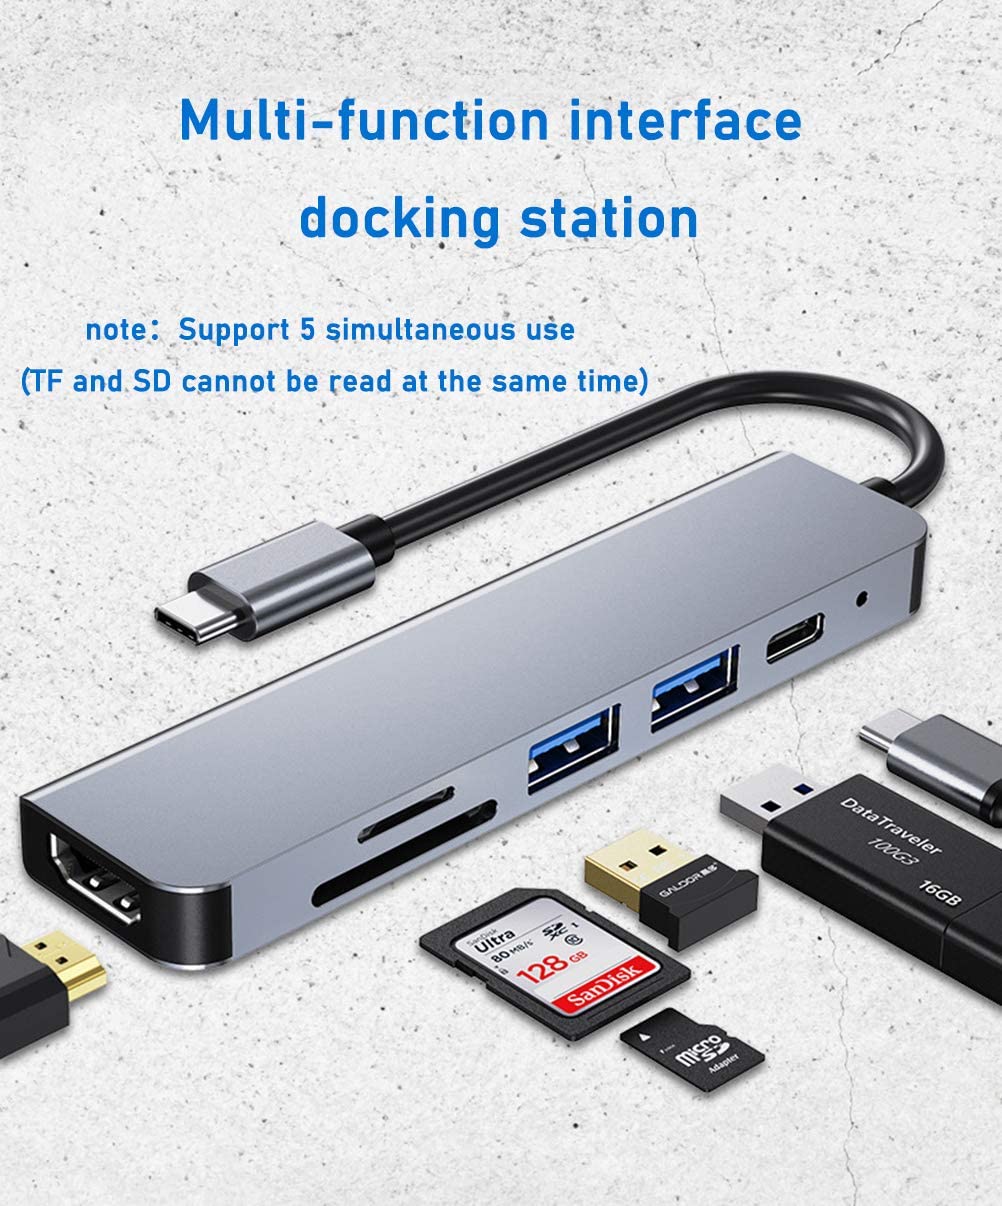 Toppdi USB C Hub Adapter 6 in 1 USB C to HDMI Multiport Adapter for Macbook/Pro/Air/Ipad Pro Adapter Compatible with USB C Laptops and More Type C Devices (4K HDMI USB SD / TF Card Reader 87W PD)